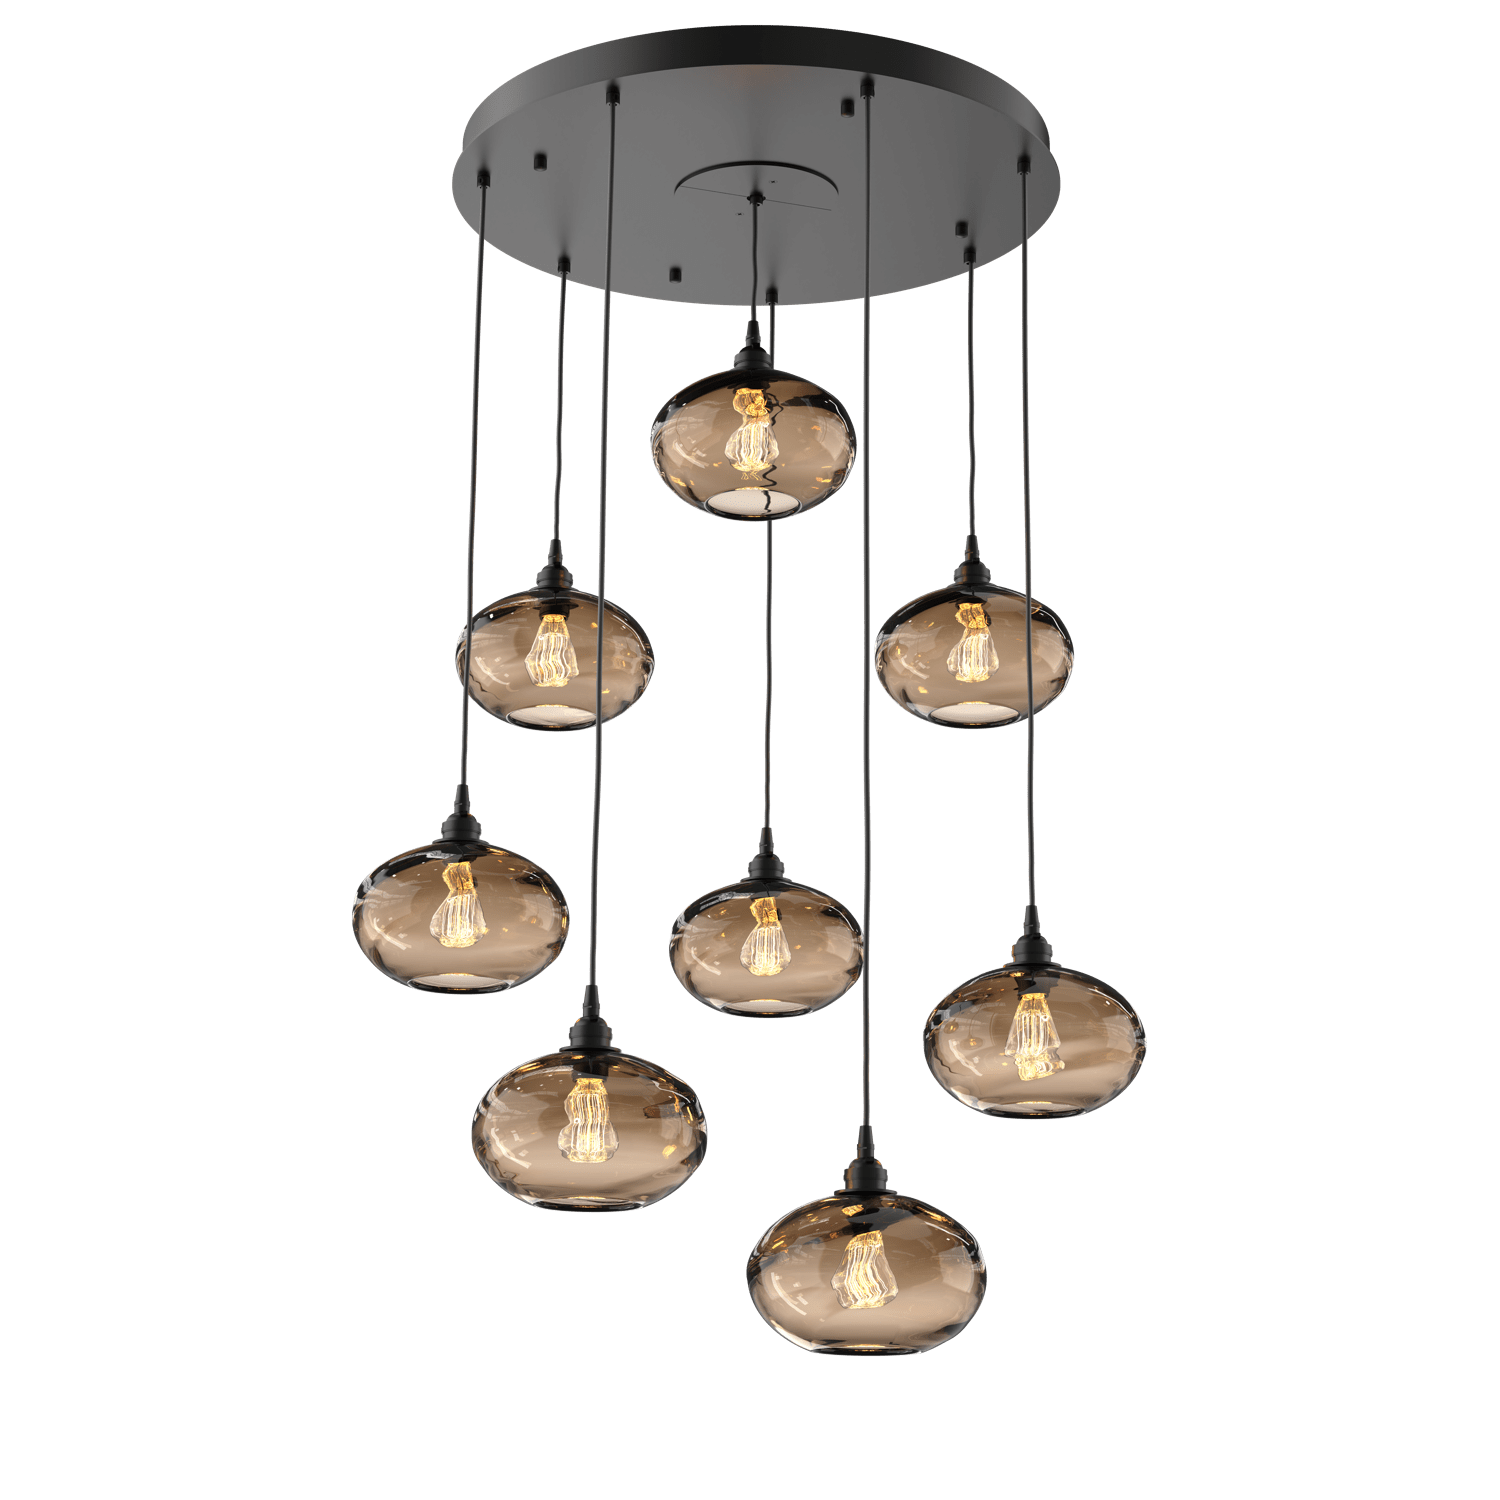 CHB0036-08-MB-OB-Hammerton-Studio-Optic-Blown-Glass-Coppa-8-light-round-pendant-chandelier-with-matte-black-finish-and-optic-bronze-blown-glass-shades-and-incandescent-lamping